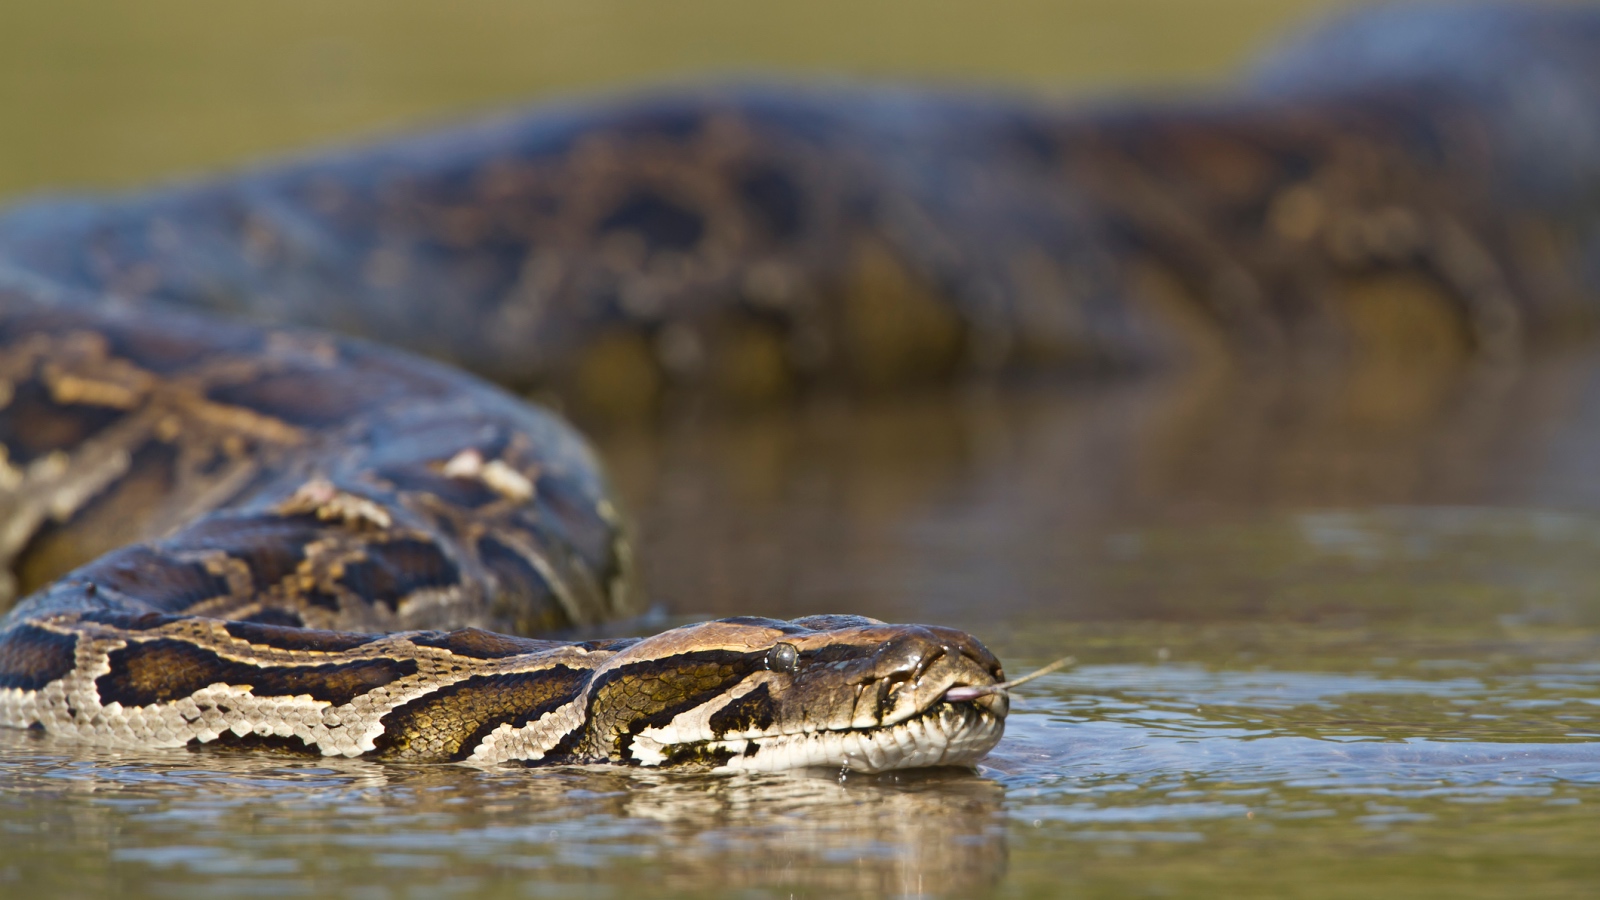 Burmese python swimming in the water